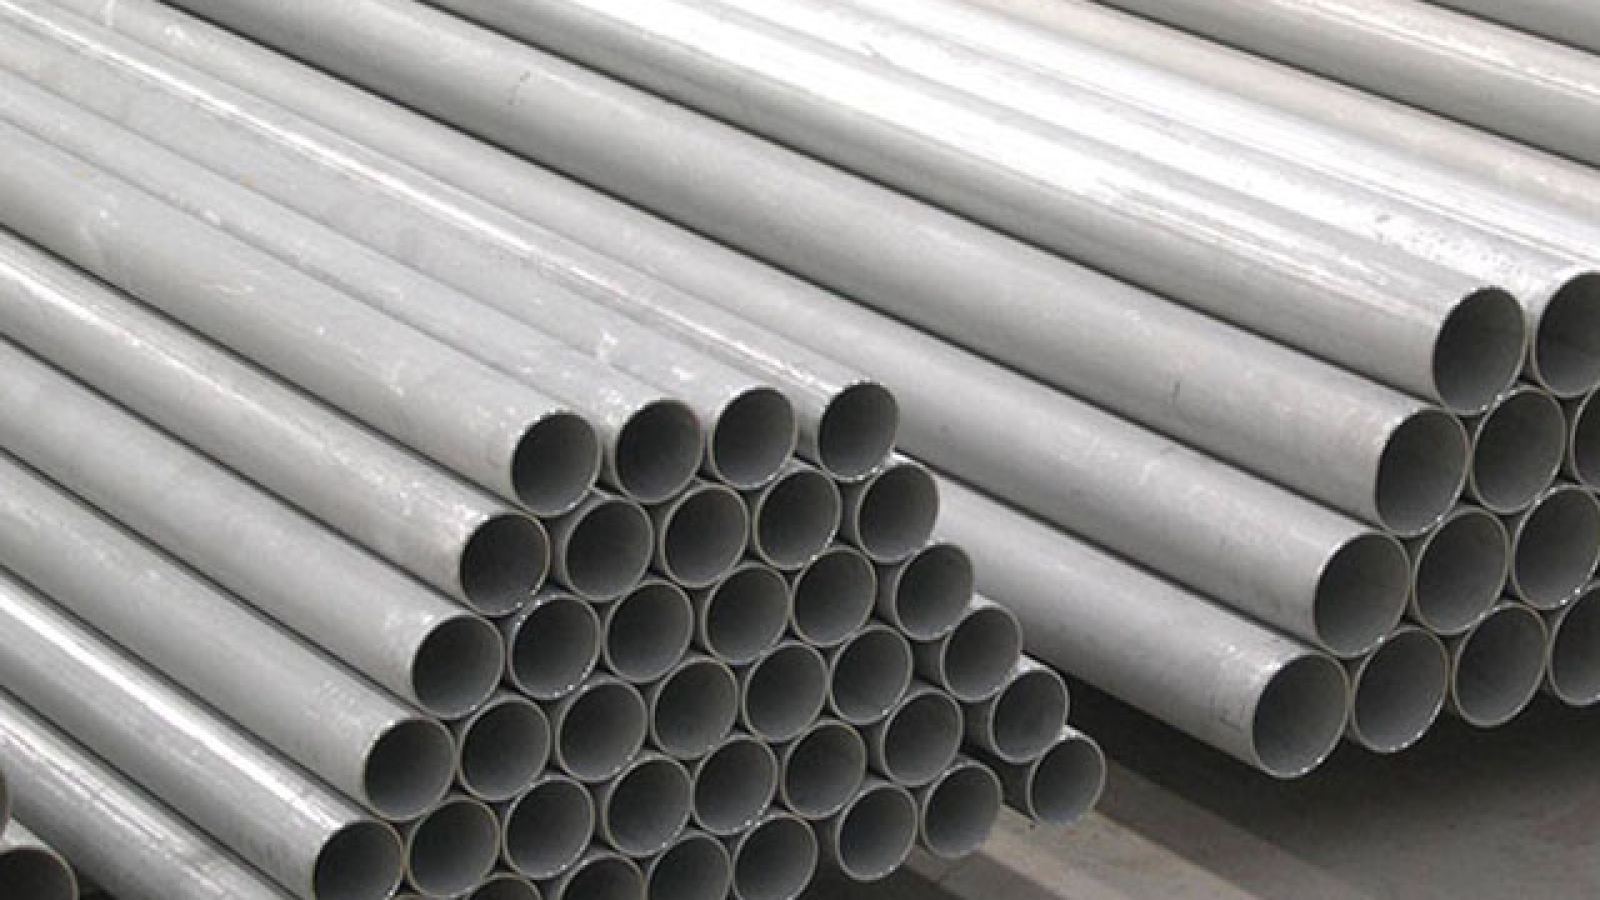 Jual Pipa Tubing Stainless Steel 304L Seamless ASTM : A269